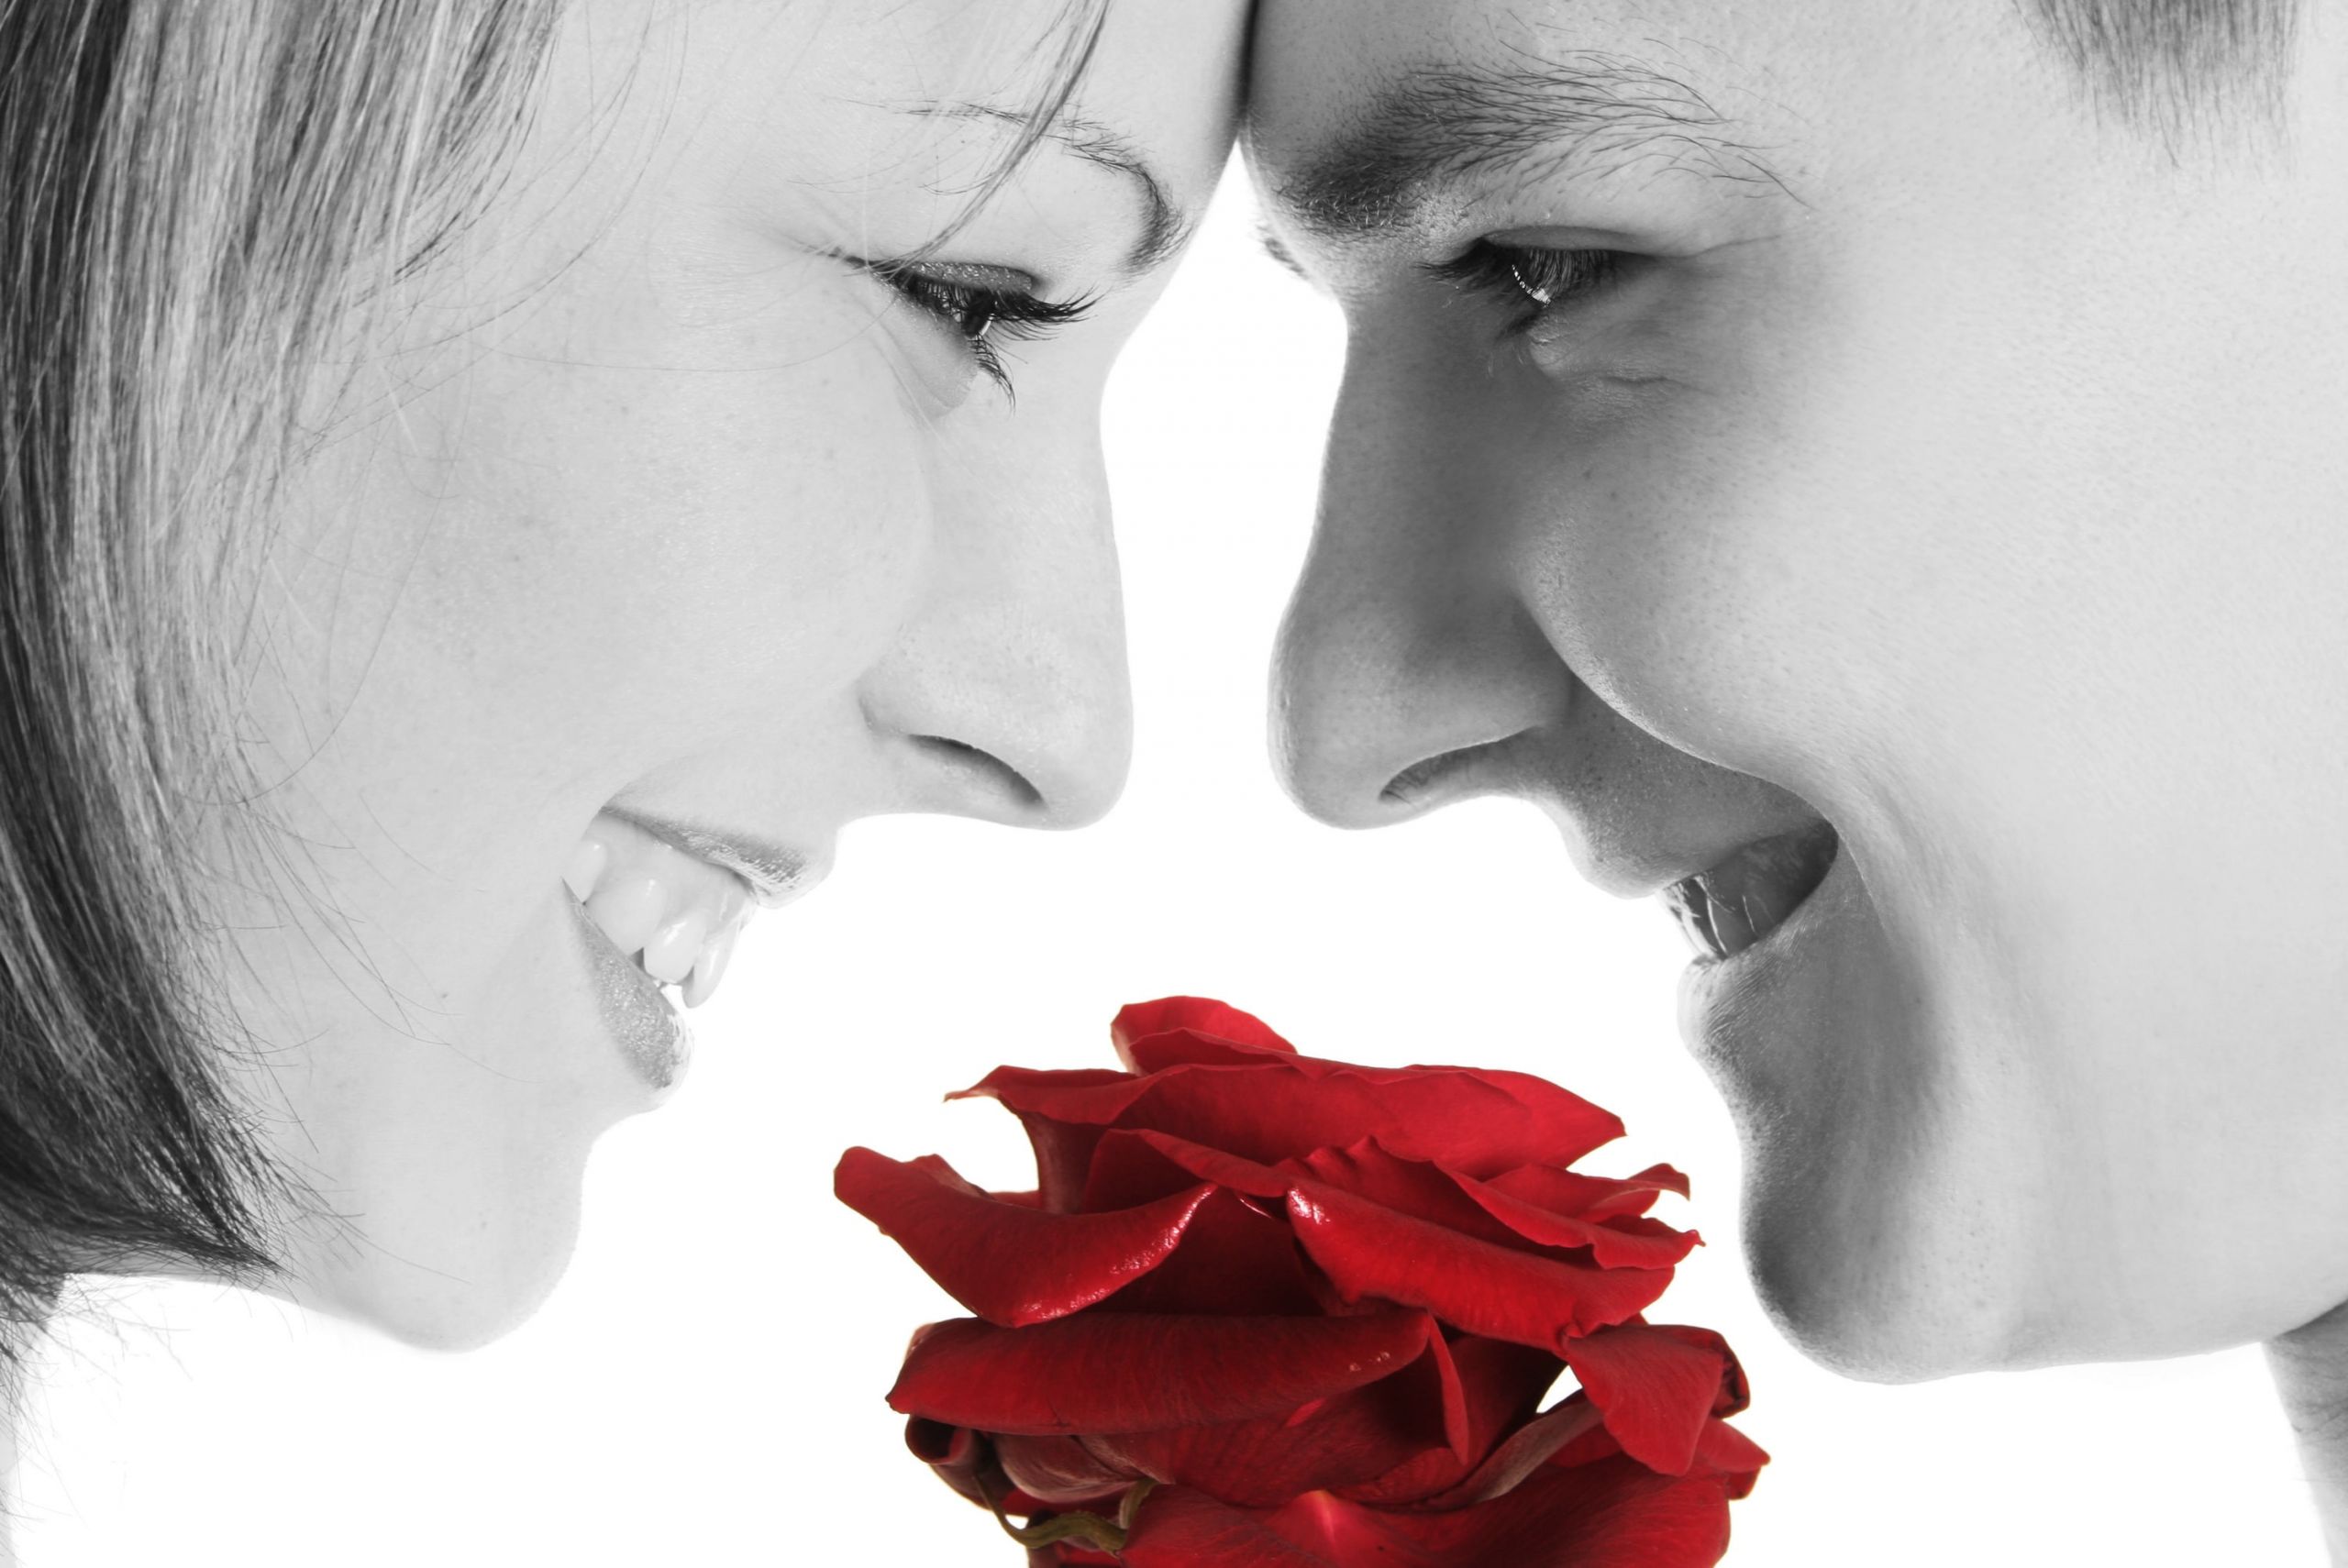 Romantic Gift Ideas Girlfriend
 10 Romantic & Inexpensive Gift Ideas for Your Girlfriend